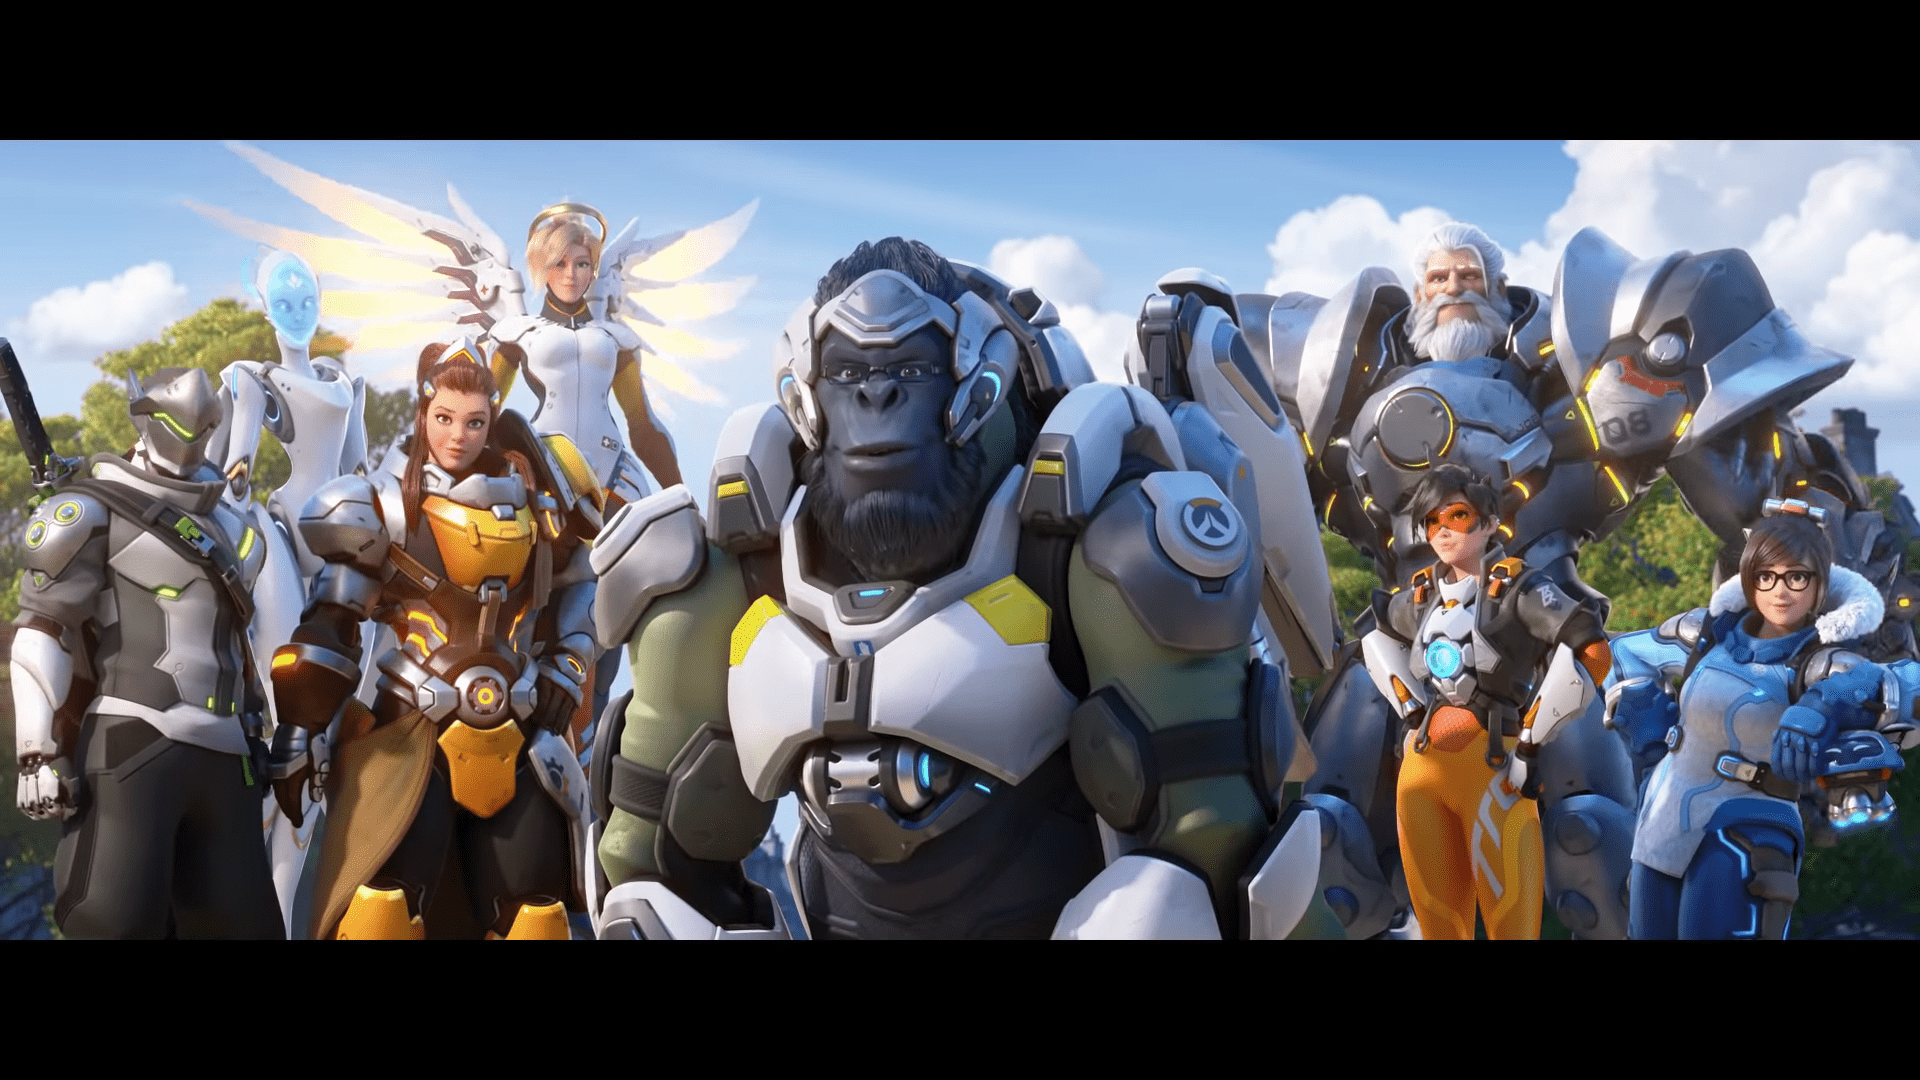 Overwatch Updates To Allow Ranked Open Queue Along With Role Queue And MMR Season Start Cap